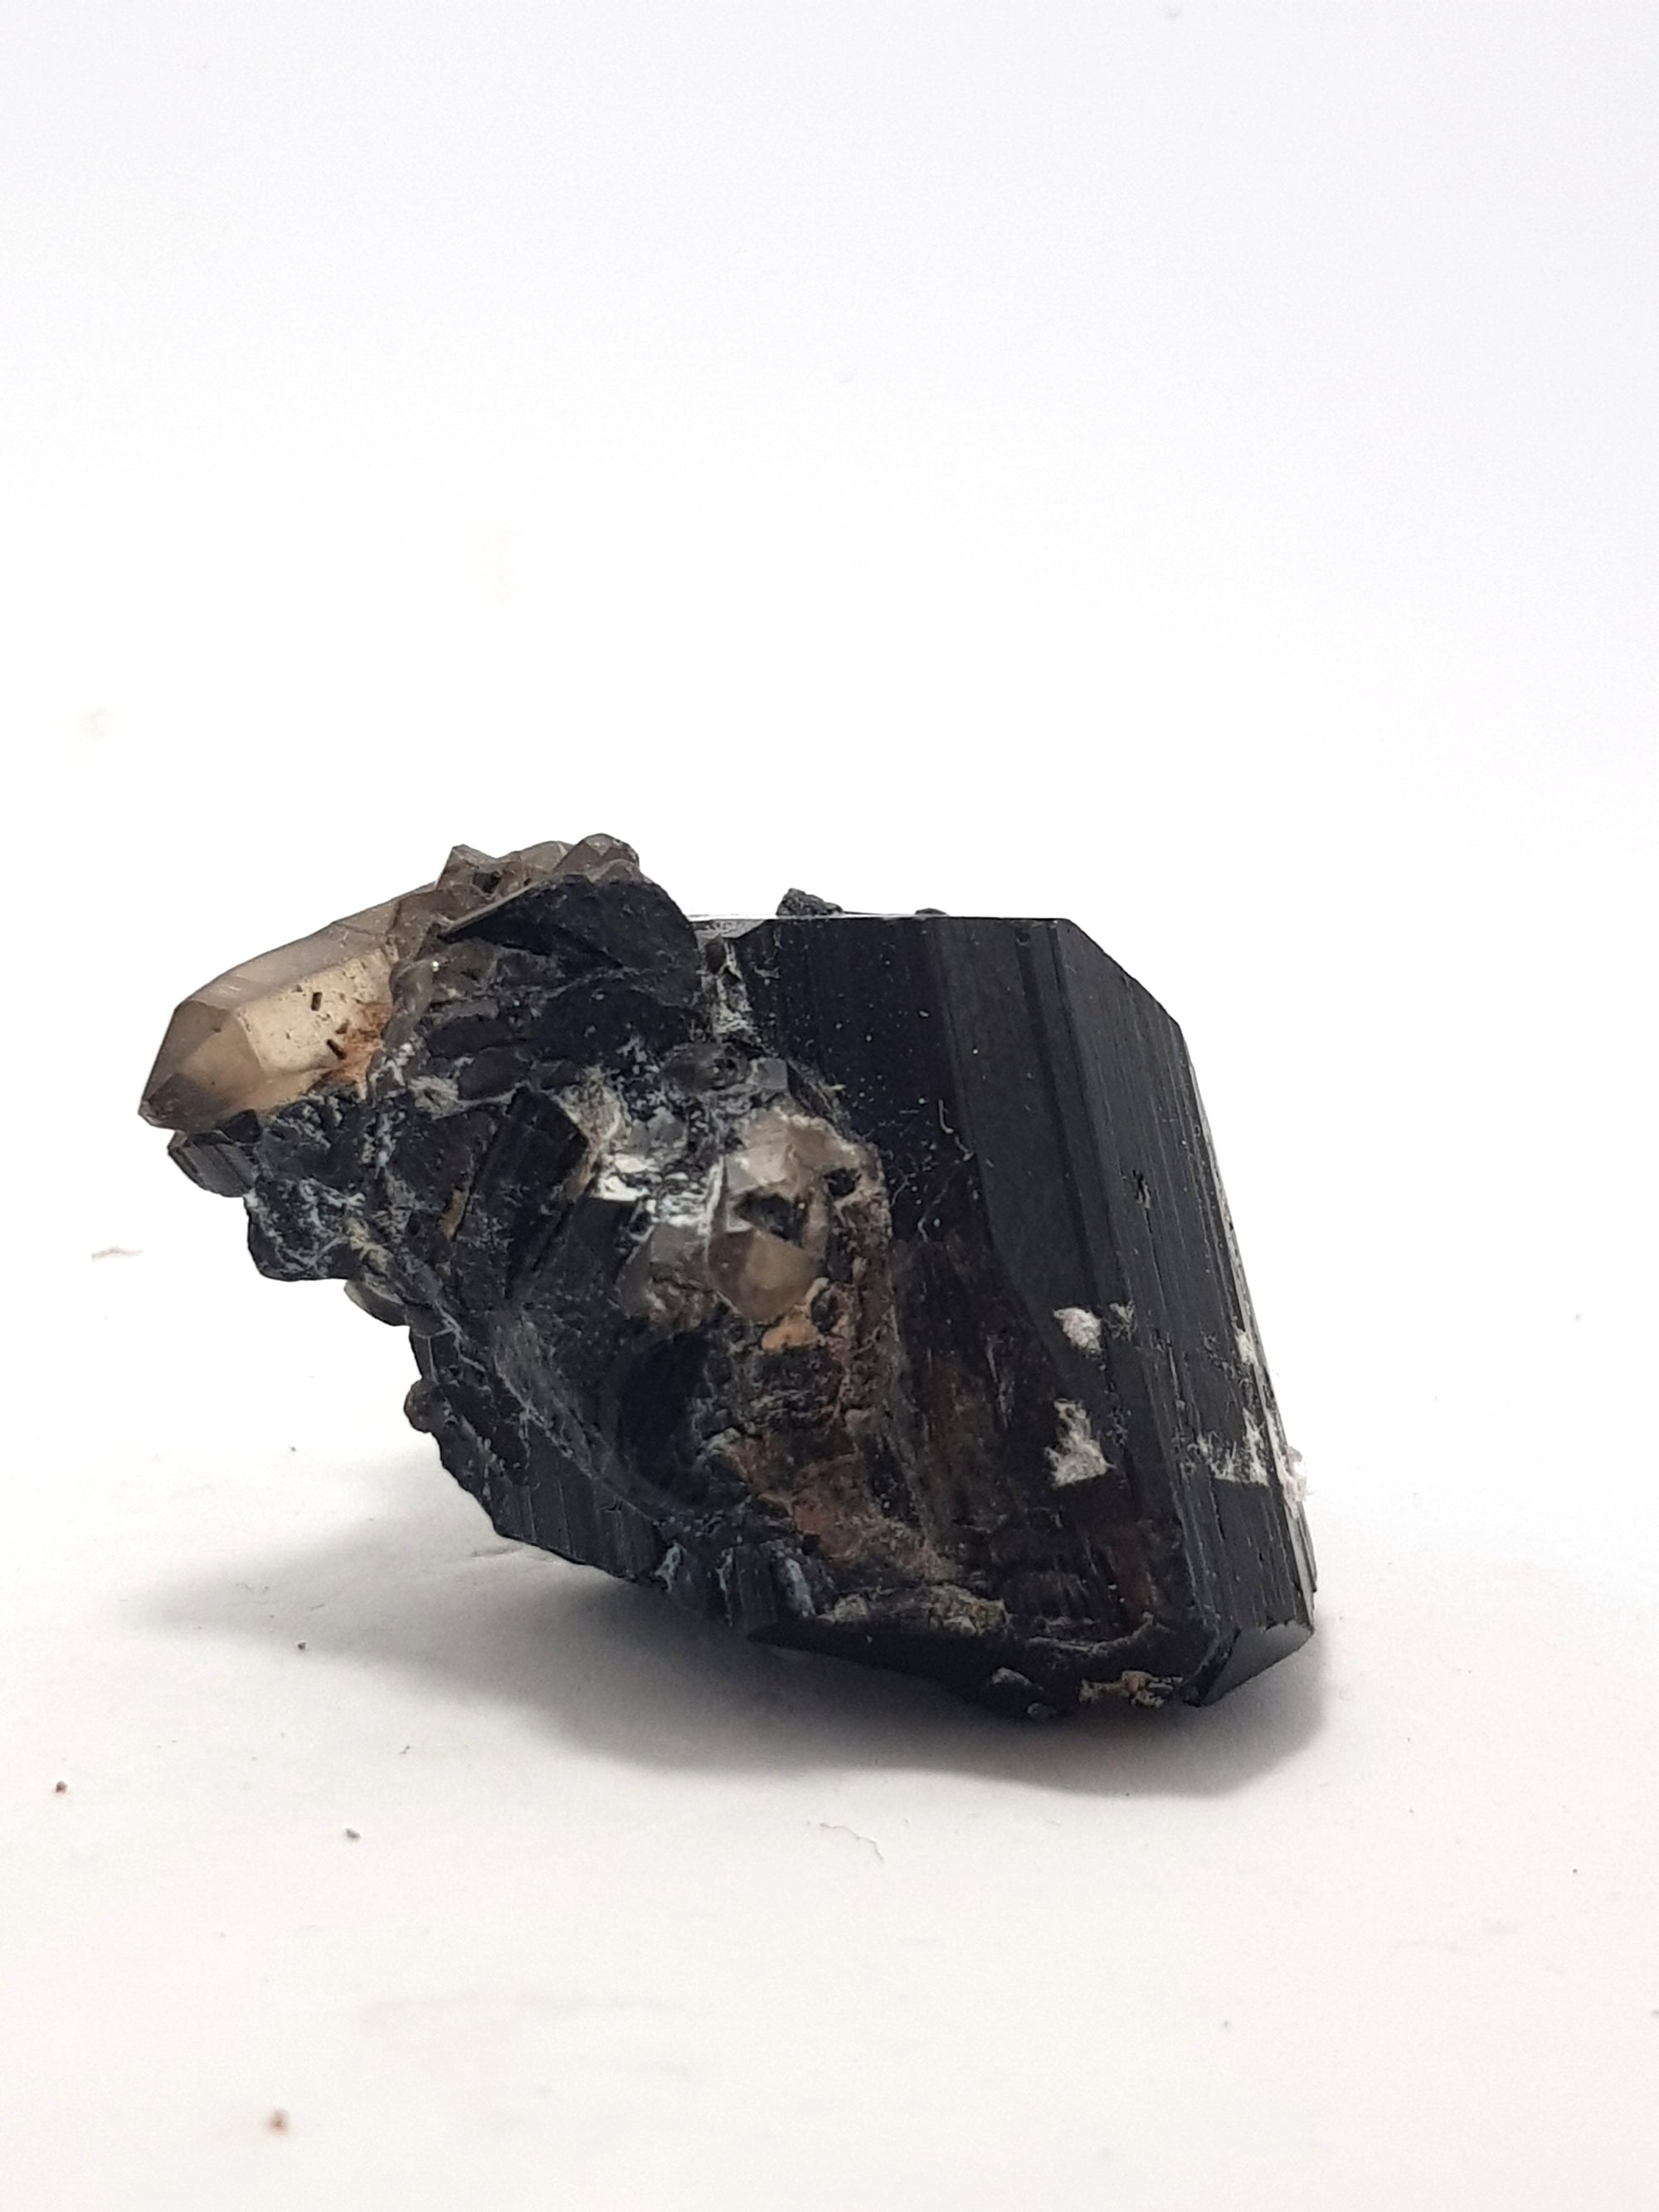 black tourmaline crystal. A well formed smoky quartz crystal is  on the top left